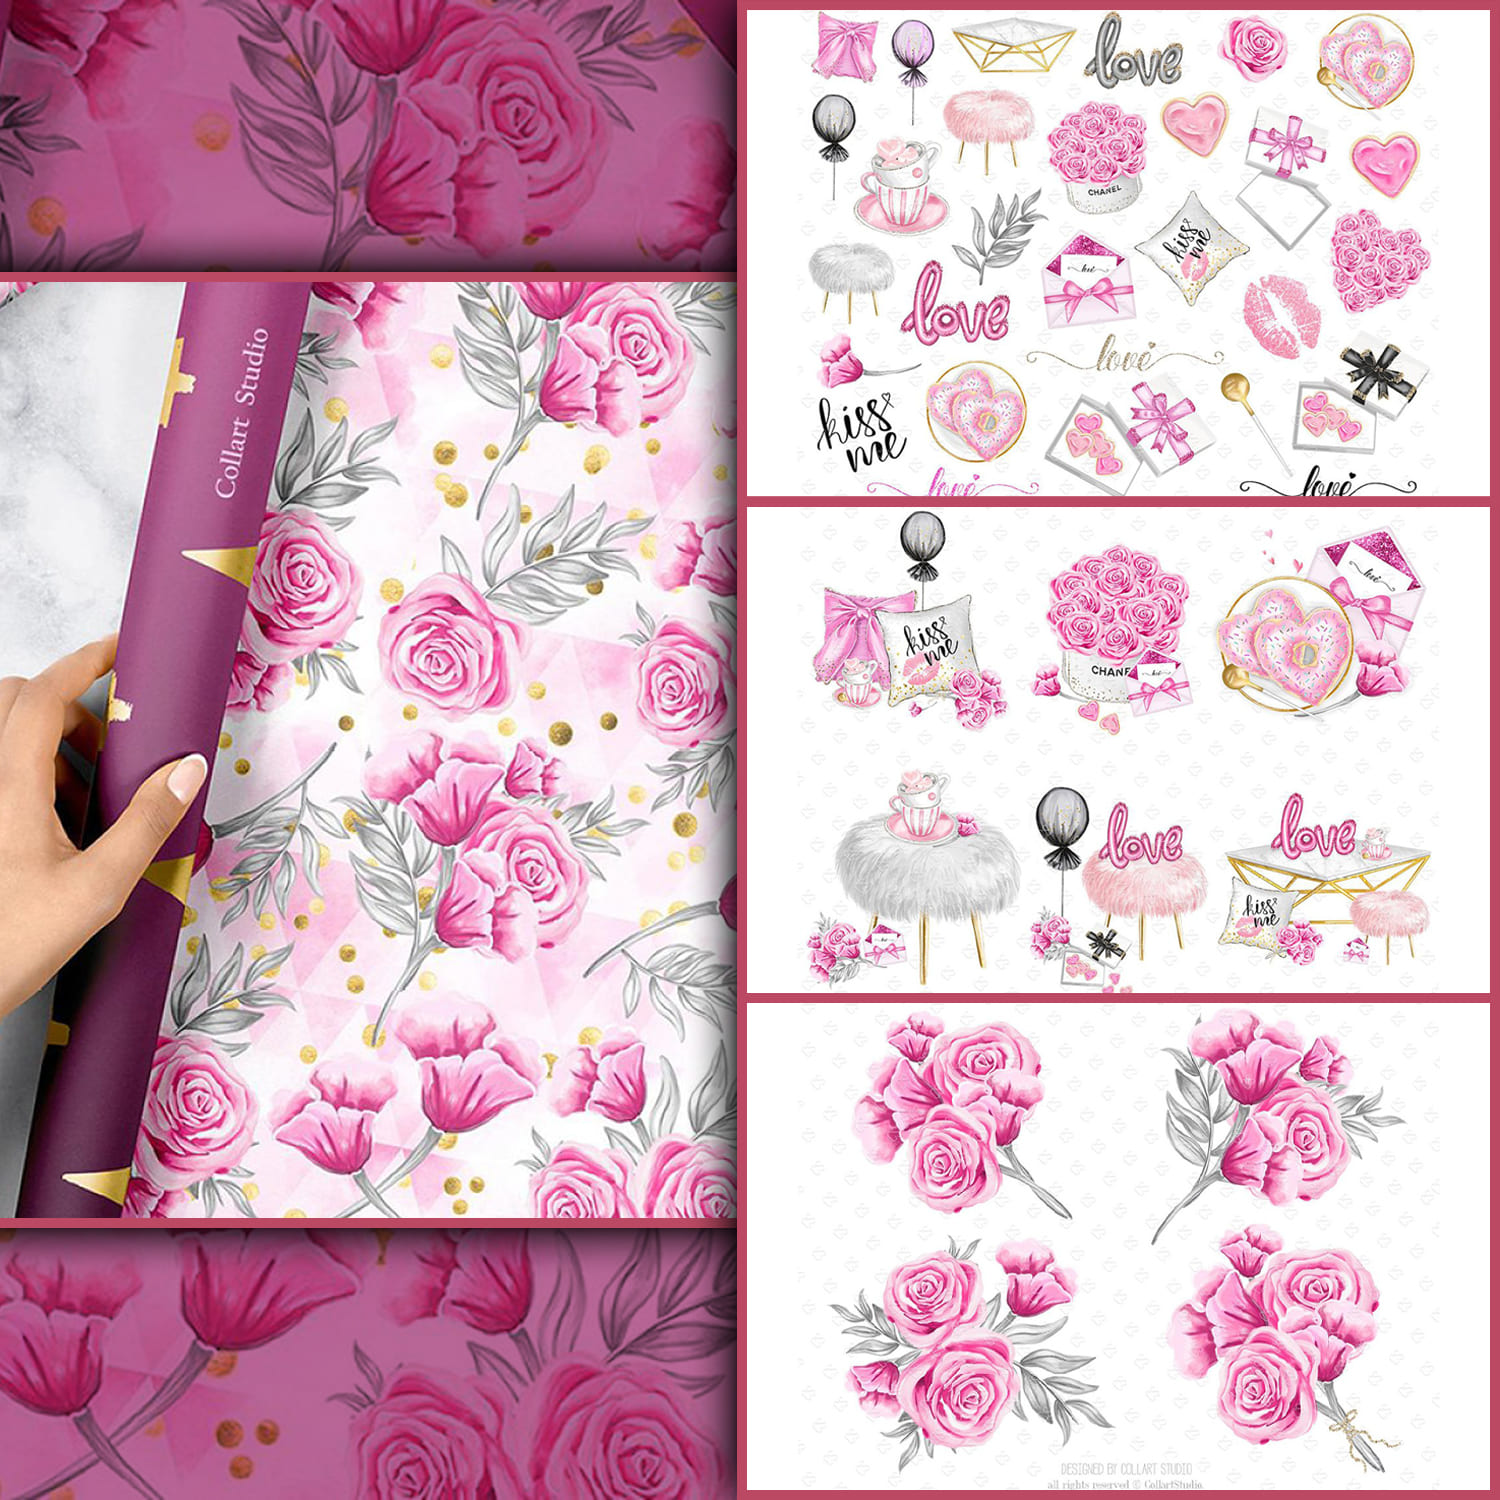 The word love is perfect for this romantic clipart filled with roses and other romantic things.